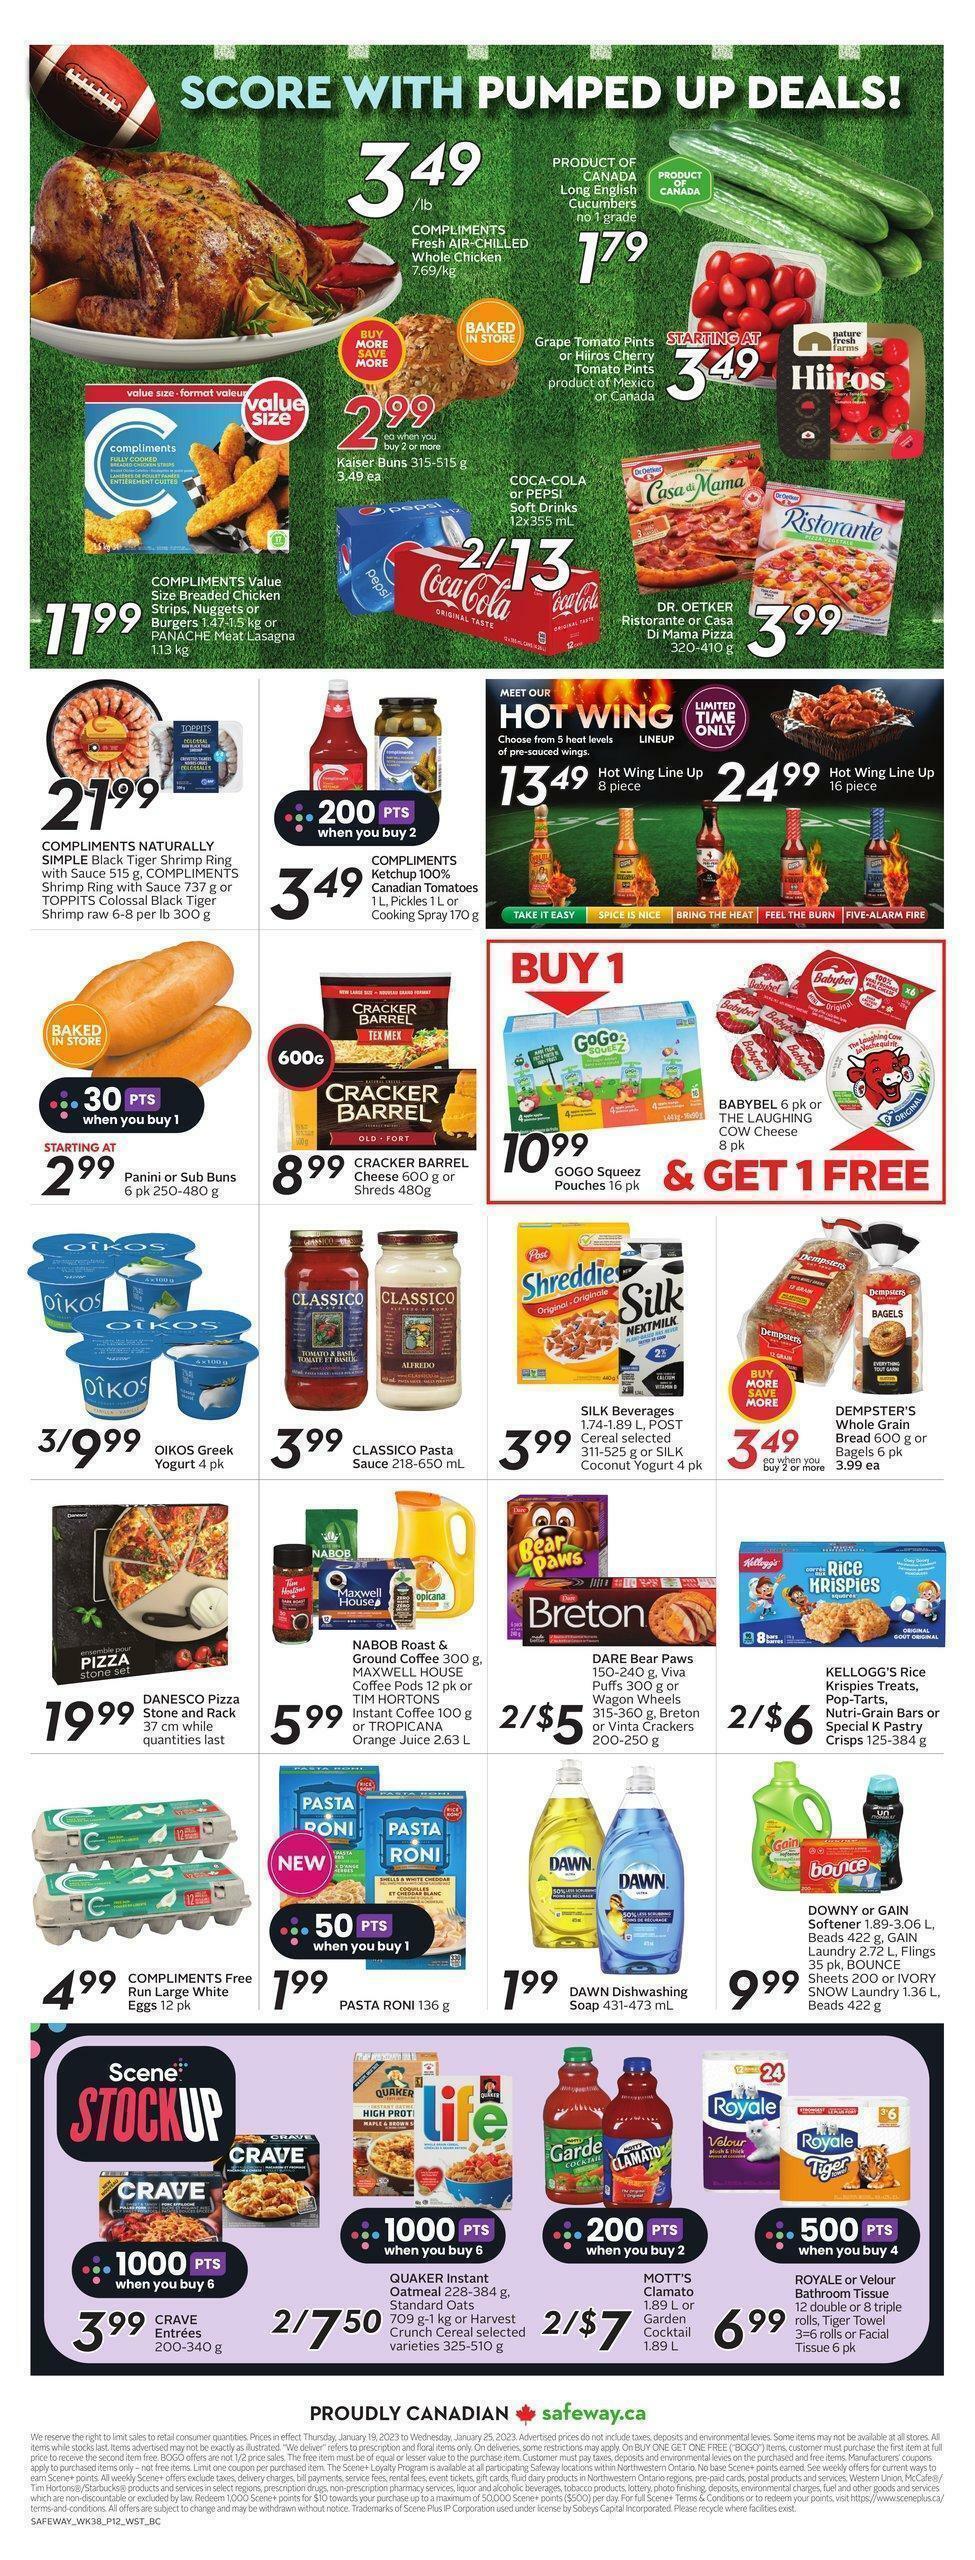 Safeway Flyer from January 19